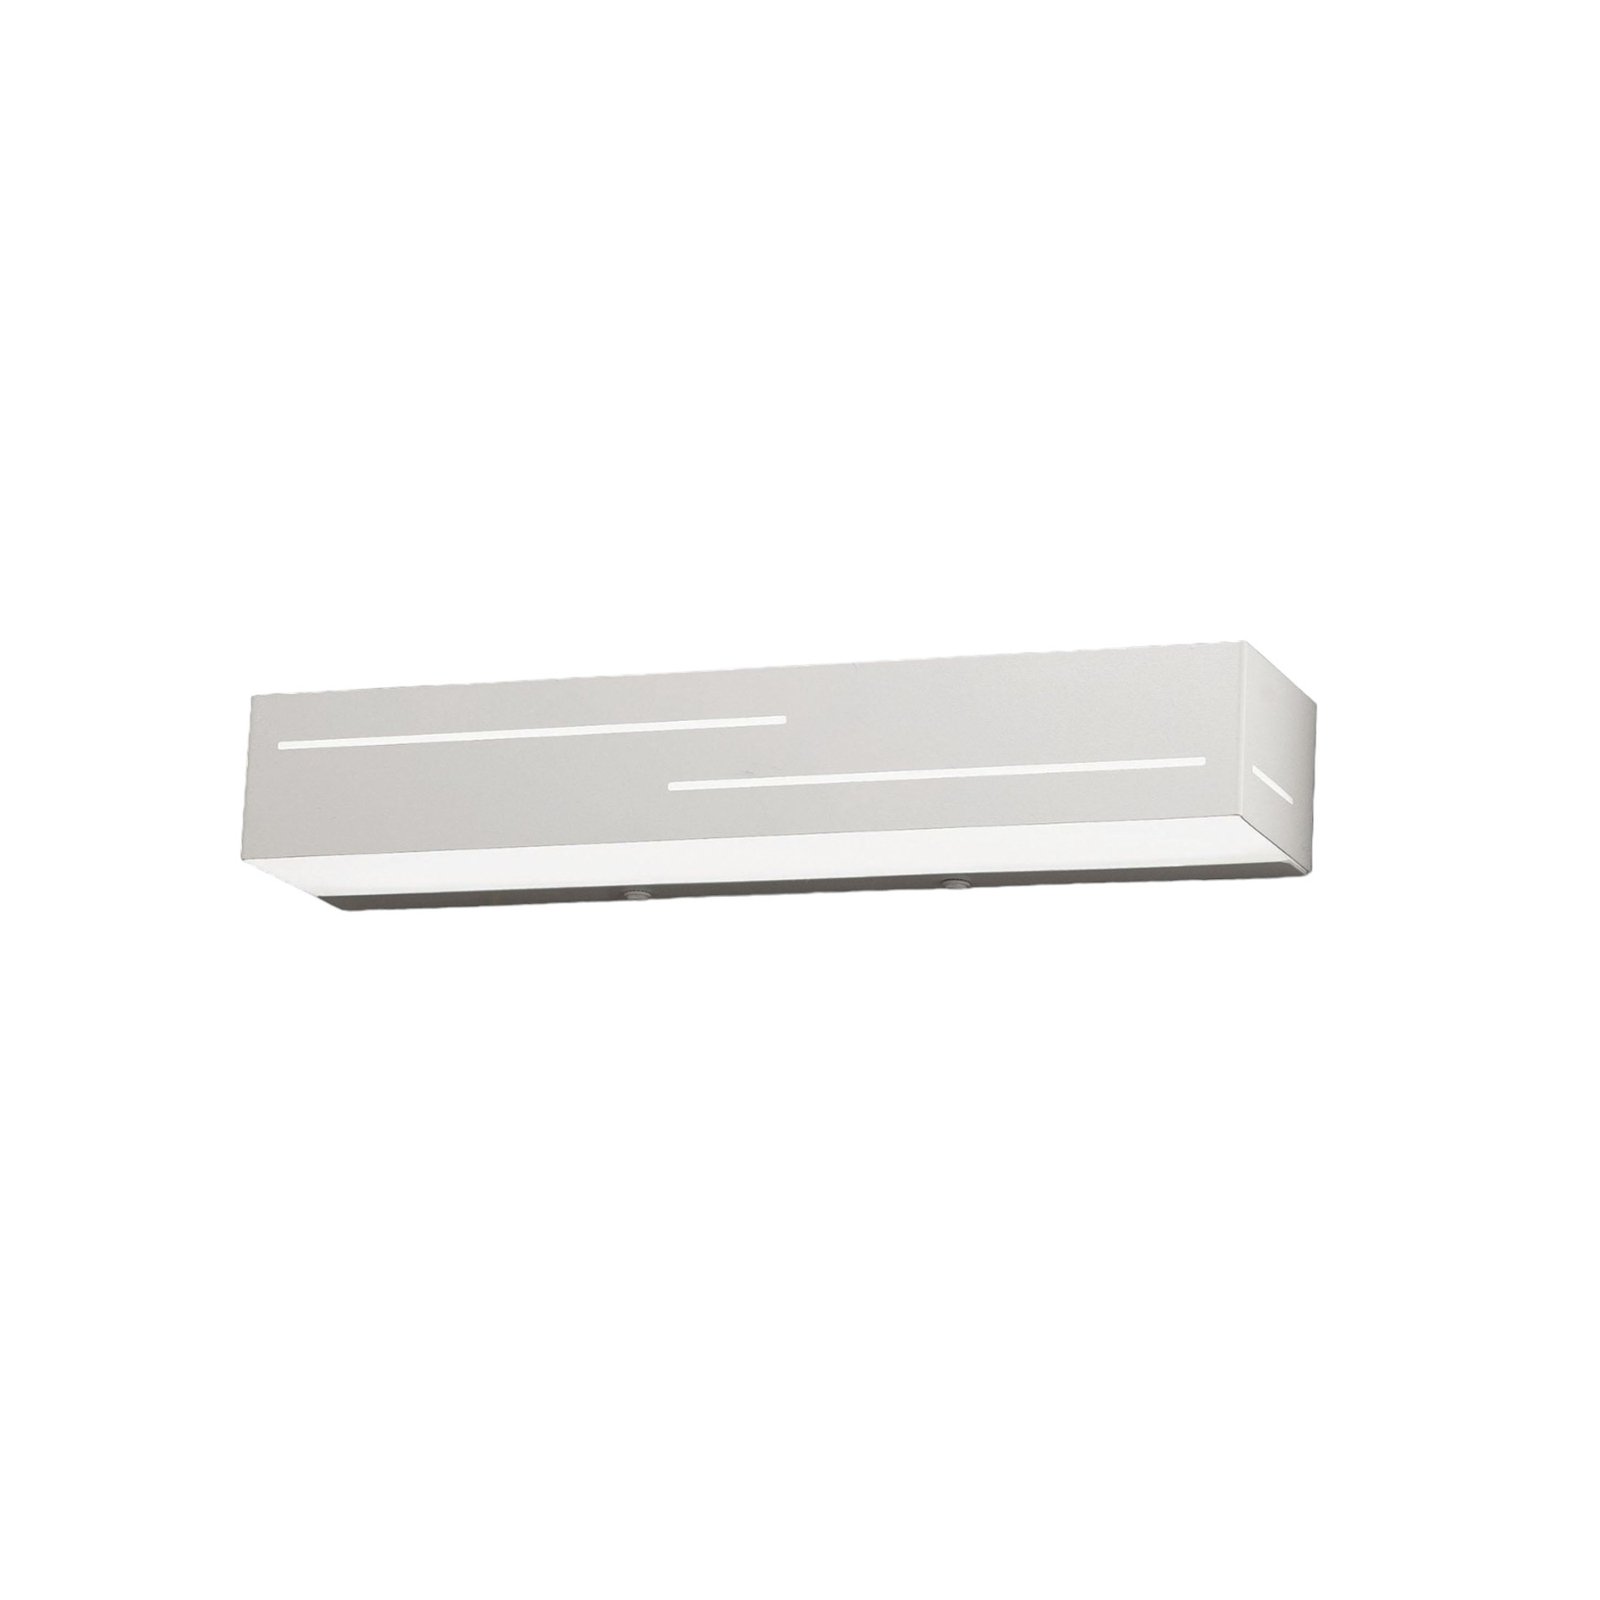 LED wall light Banny, white, width 31 cm, up- & downlight